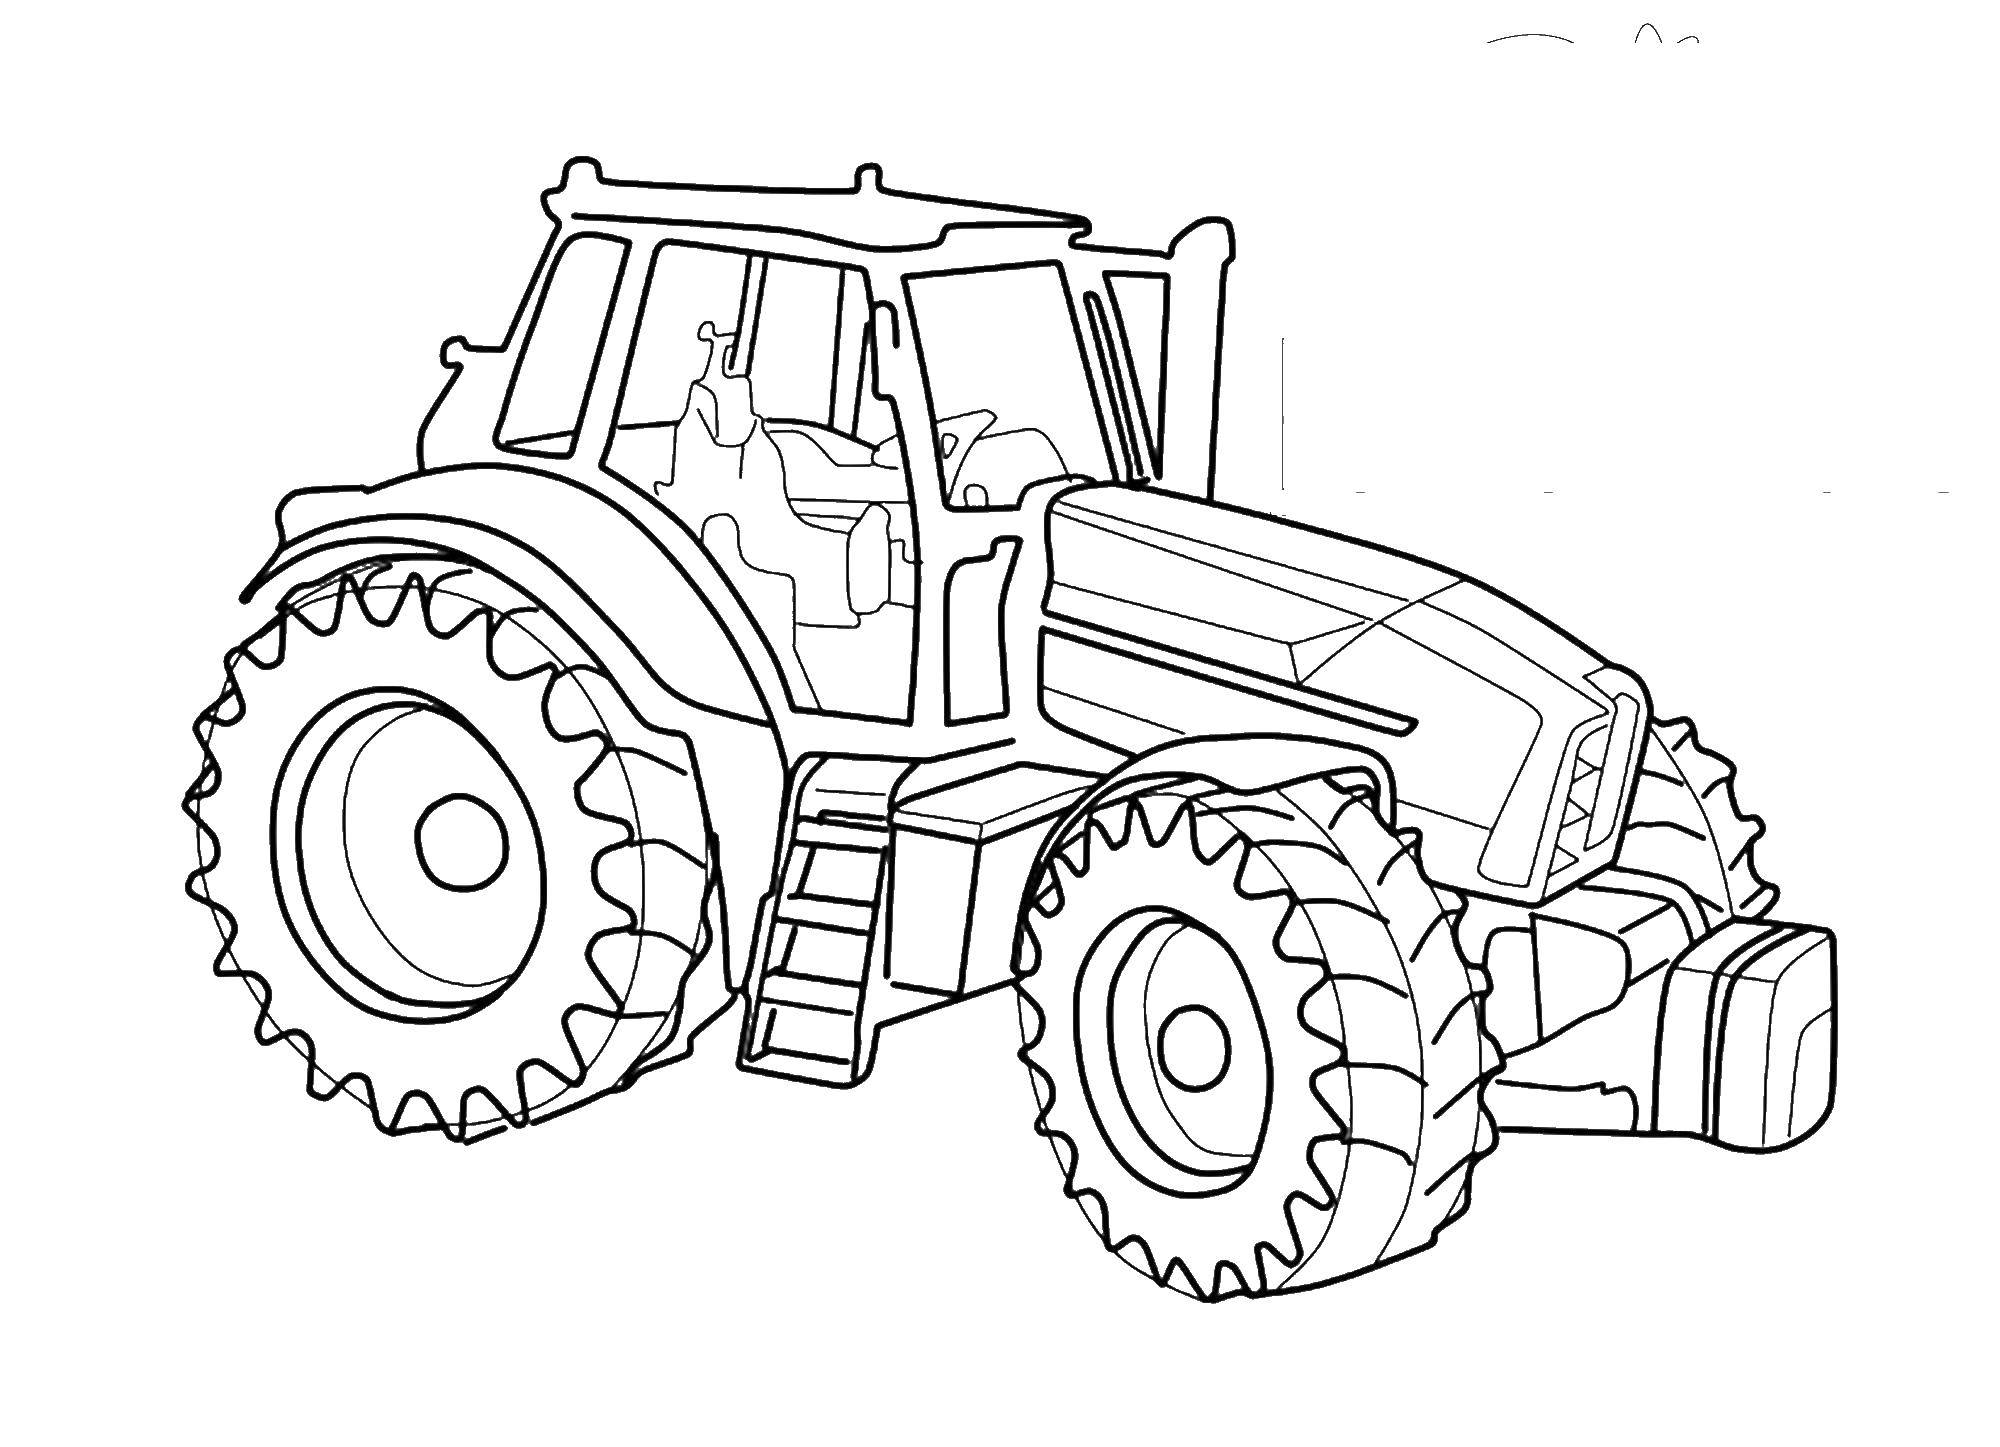 Coloring Tractor. Category tractor. Tags:  tractor.